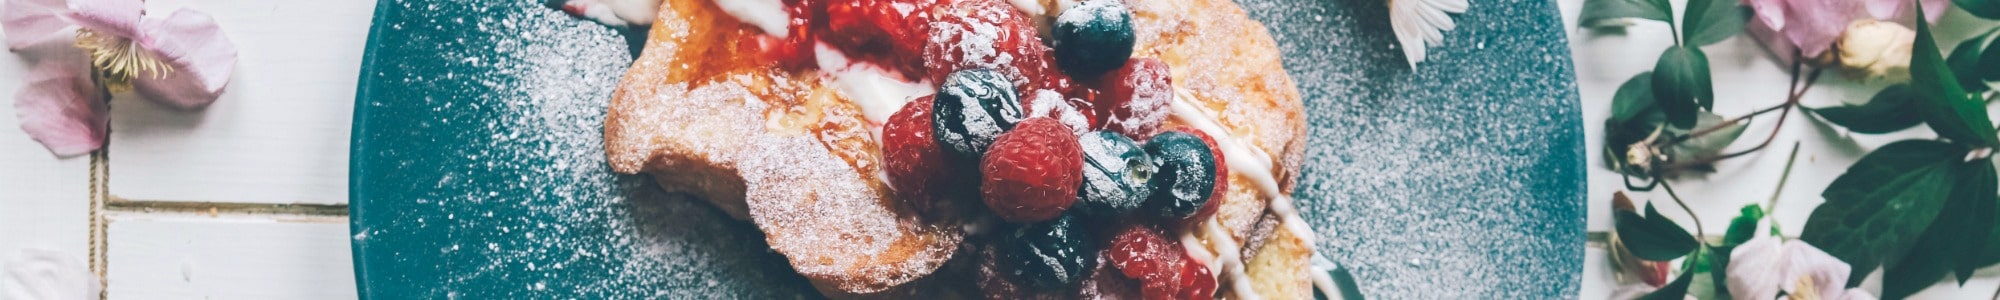 French Toast banner image